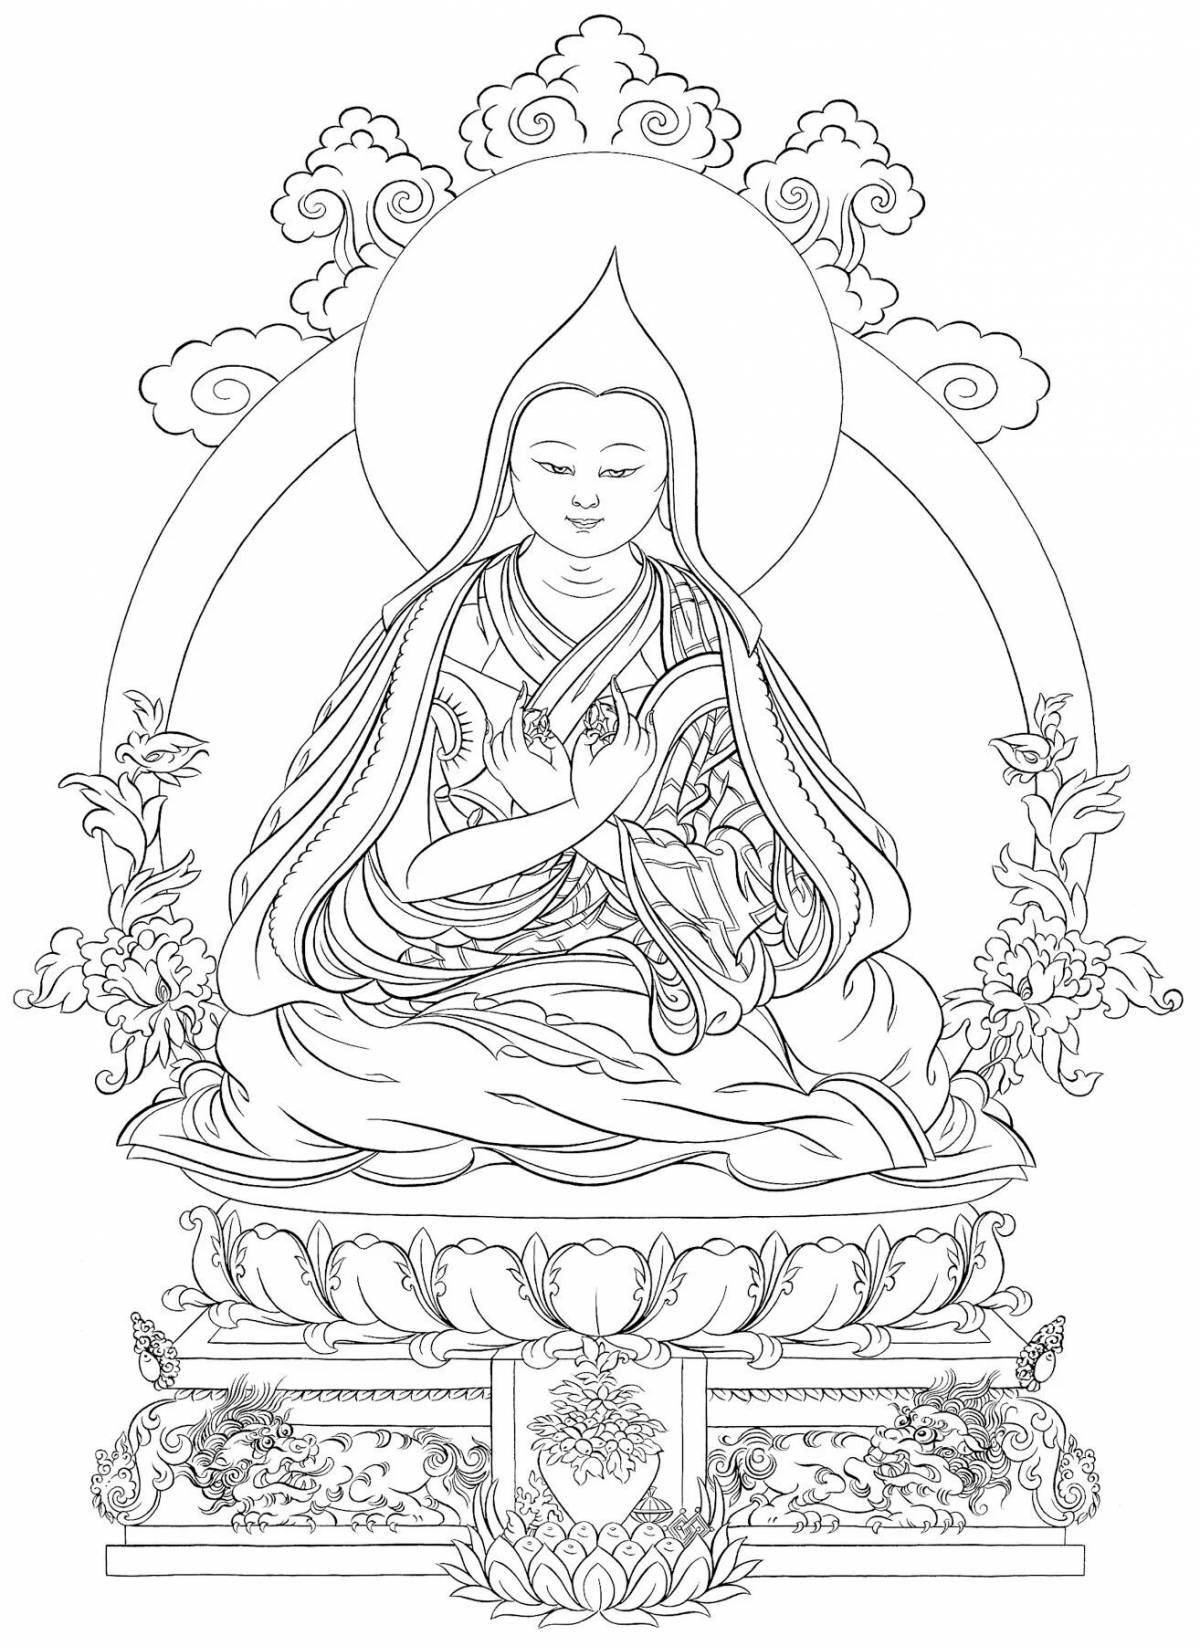 Majestic Buddhism coloring book